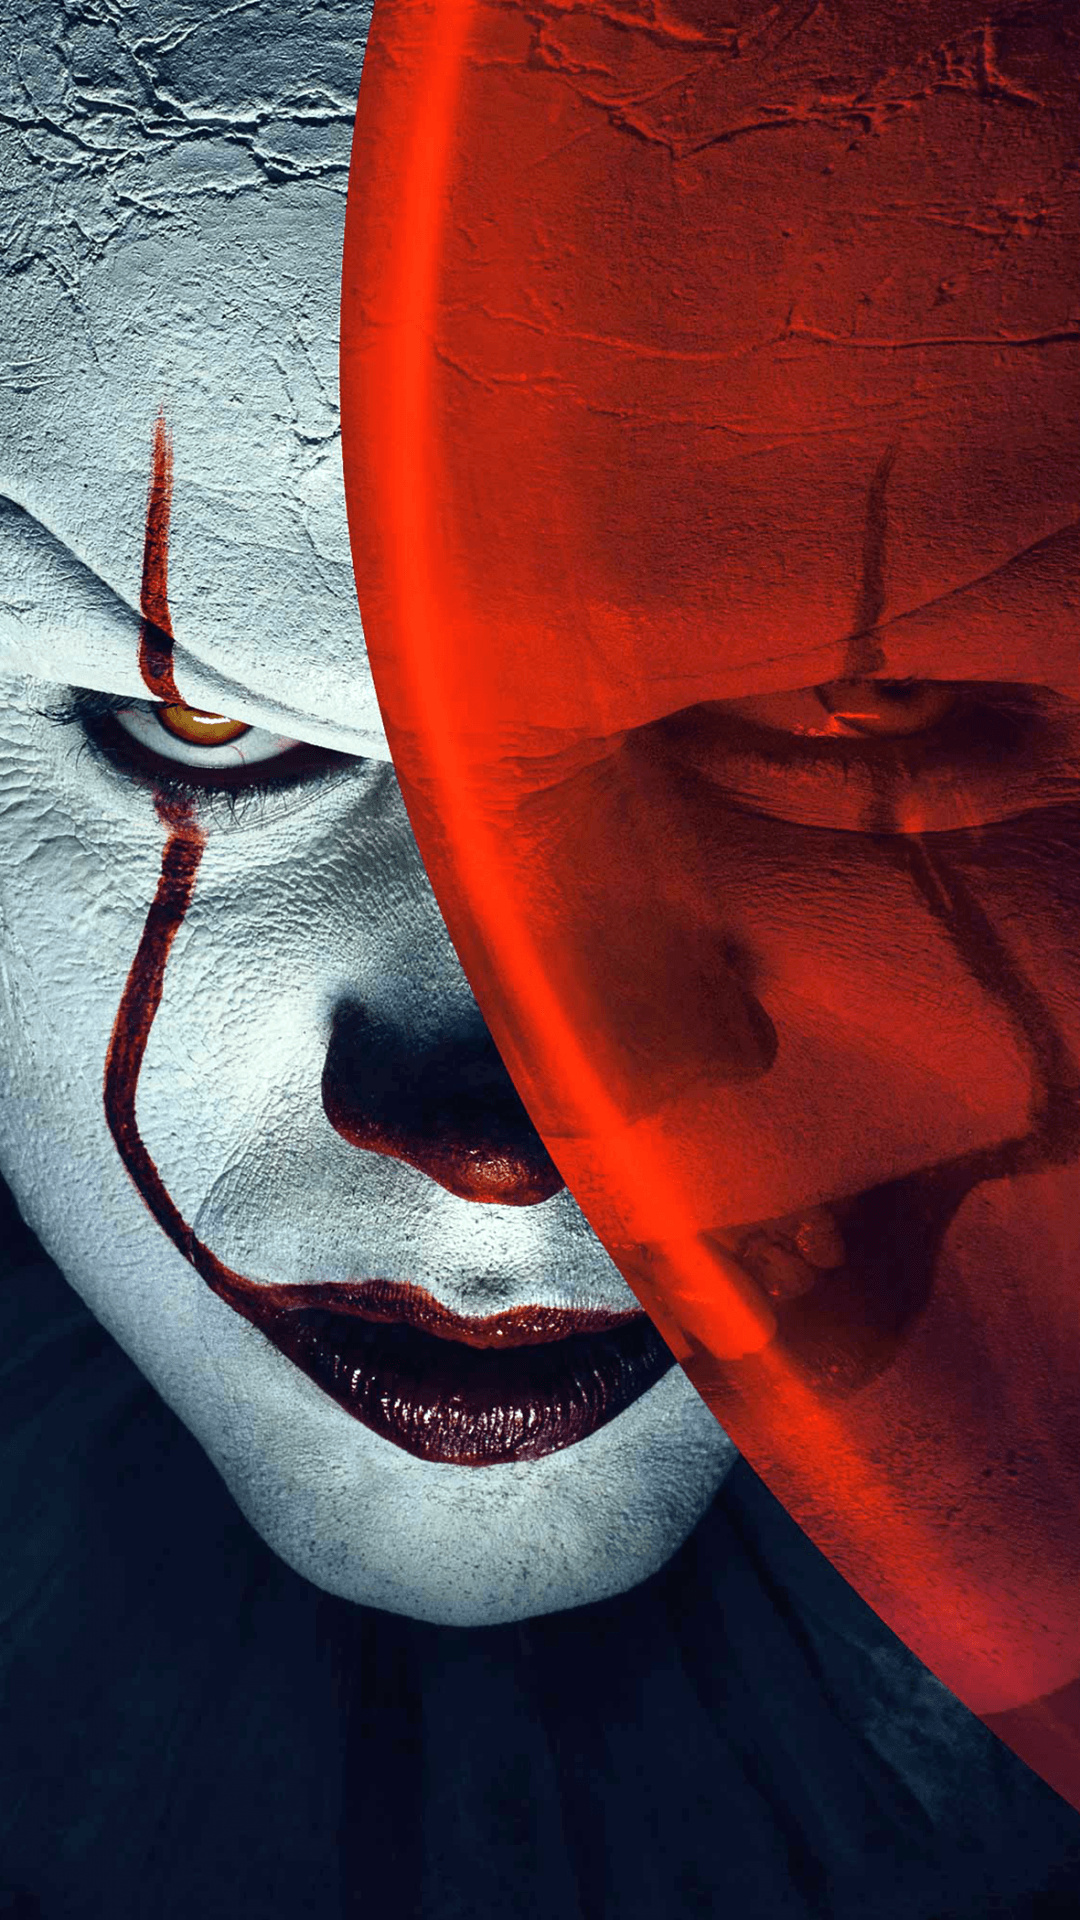 Pennywise iPhone wallpapers, Horror-themed, Terrifying visuals, Creepy clown, 1080x1920 Full HD Phone